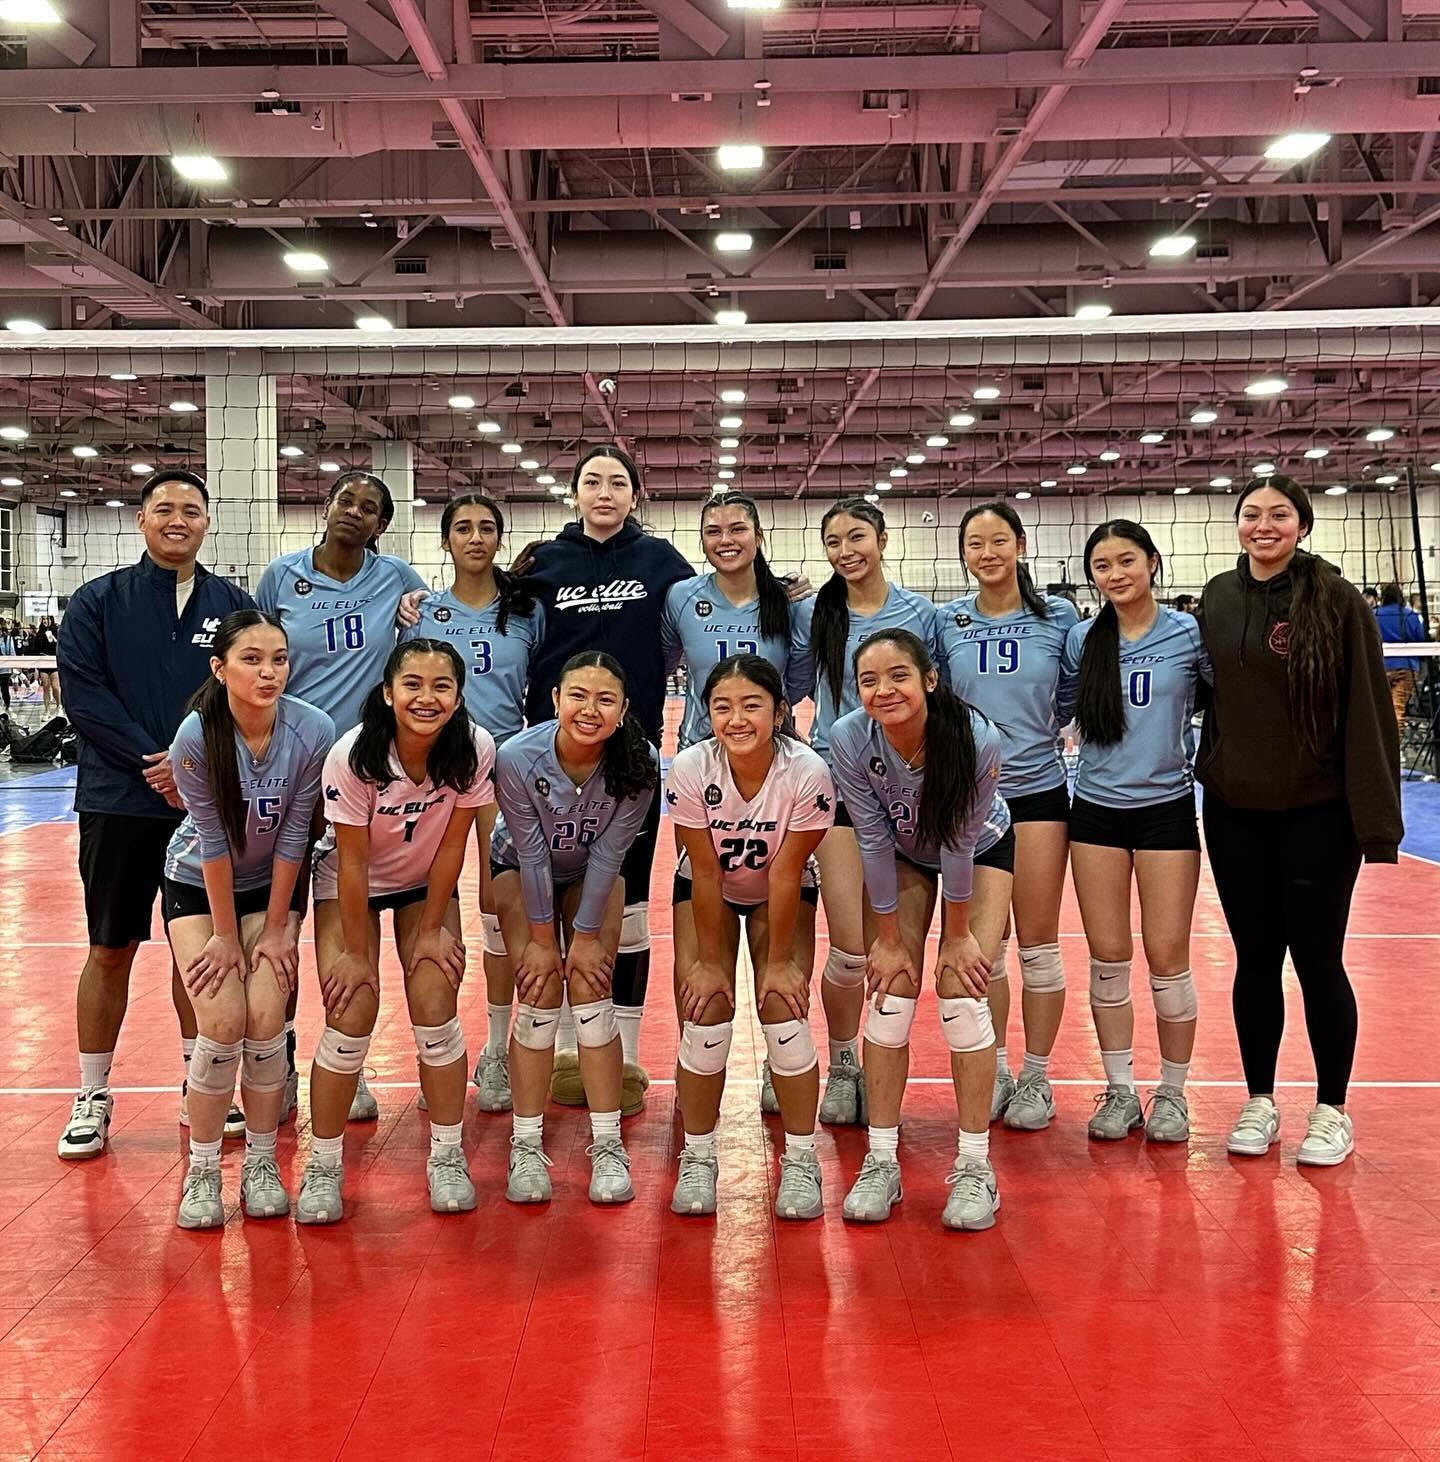 Round of applause to 16 Matt for finishing TOP 10 at the 2024 SLC Showdown National Qualifier! The team had an impressive 6-1 record on the weekend in the 16 Liberty Division! GO UC ELITE! #ucelitevbc #ucelite